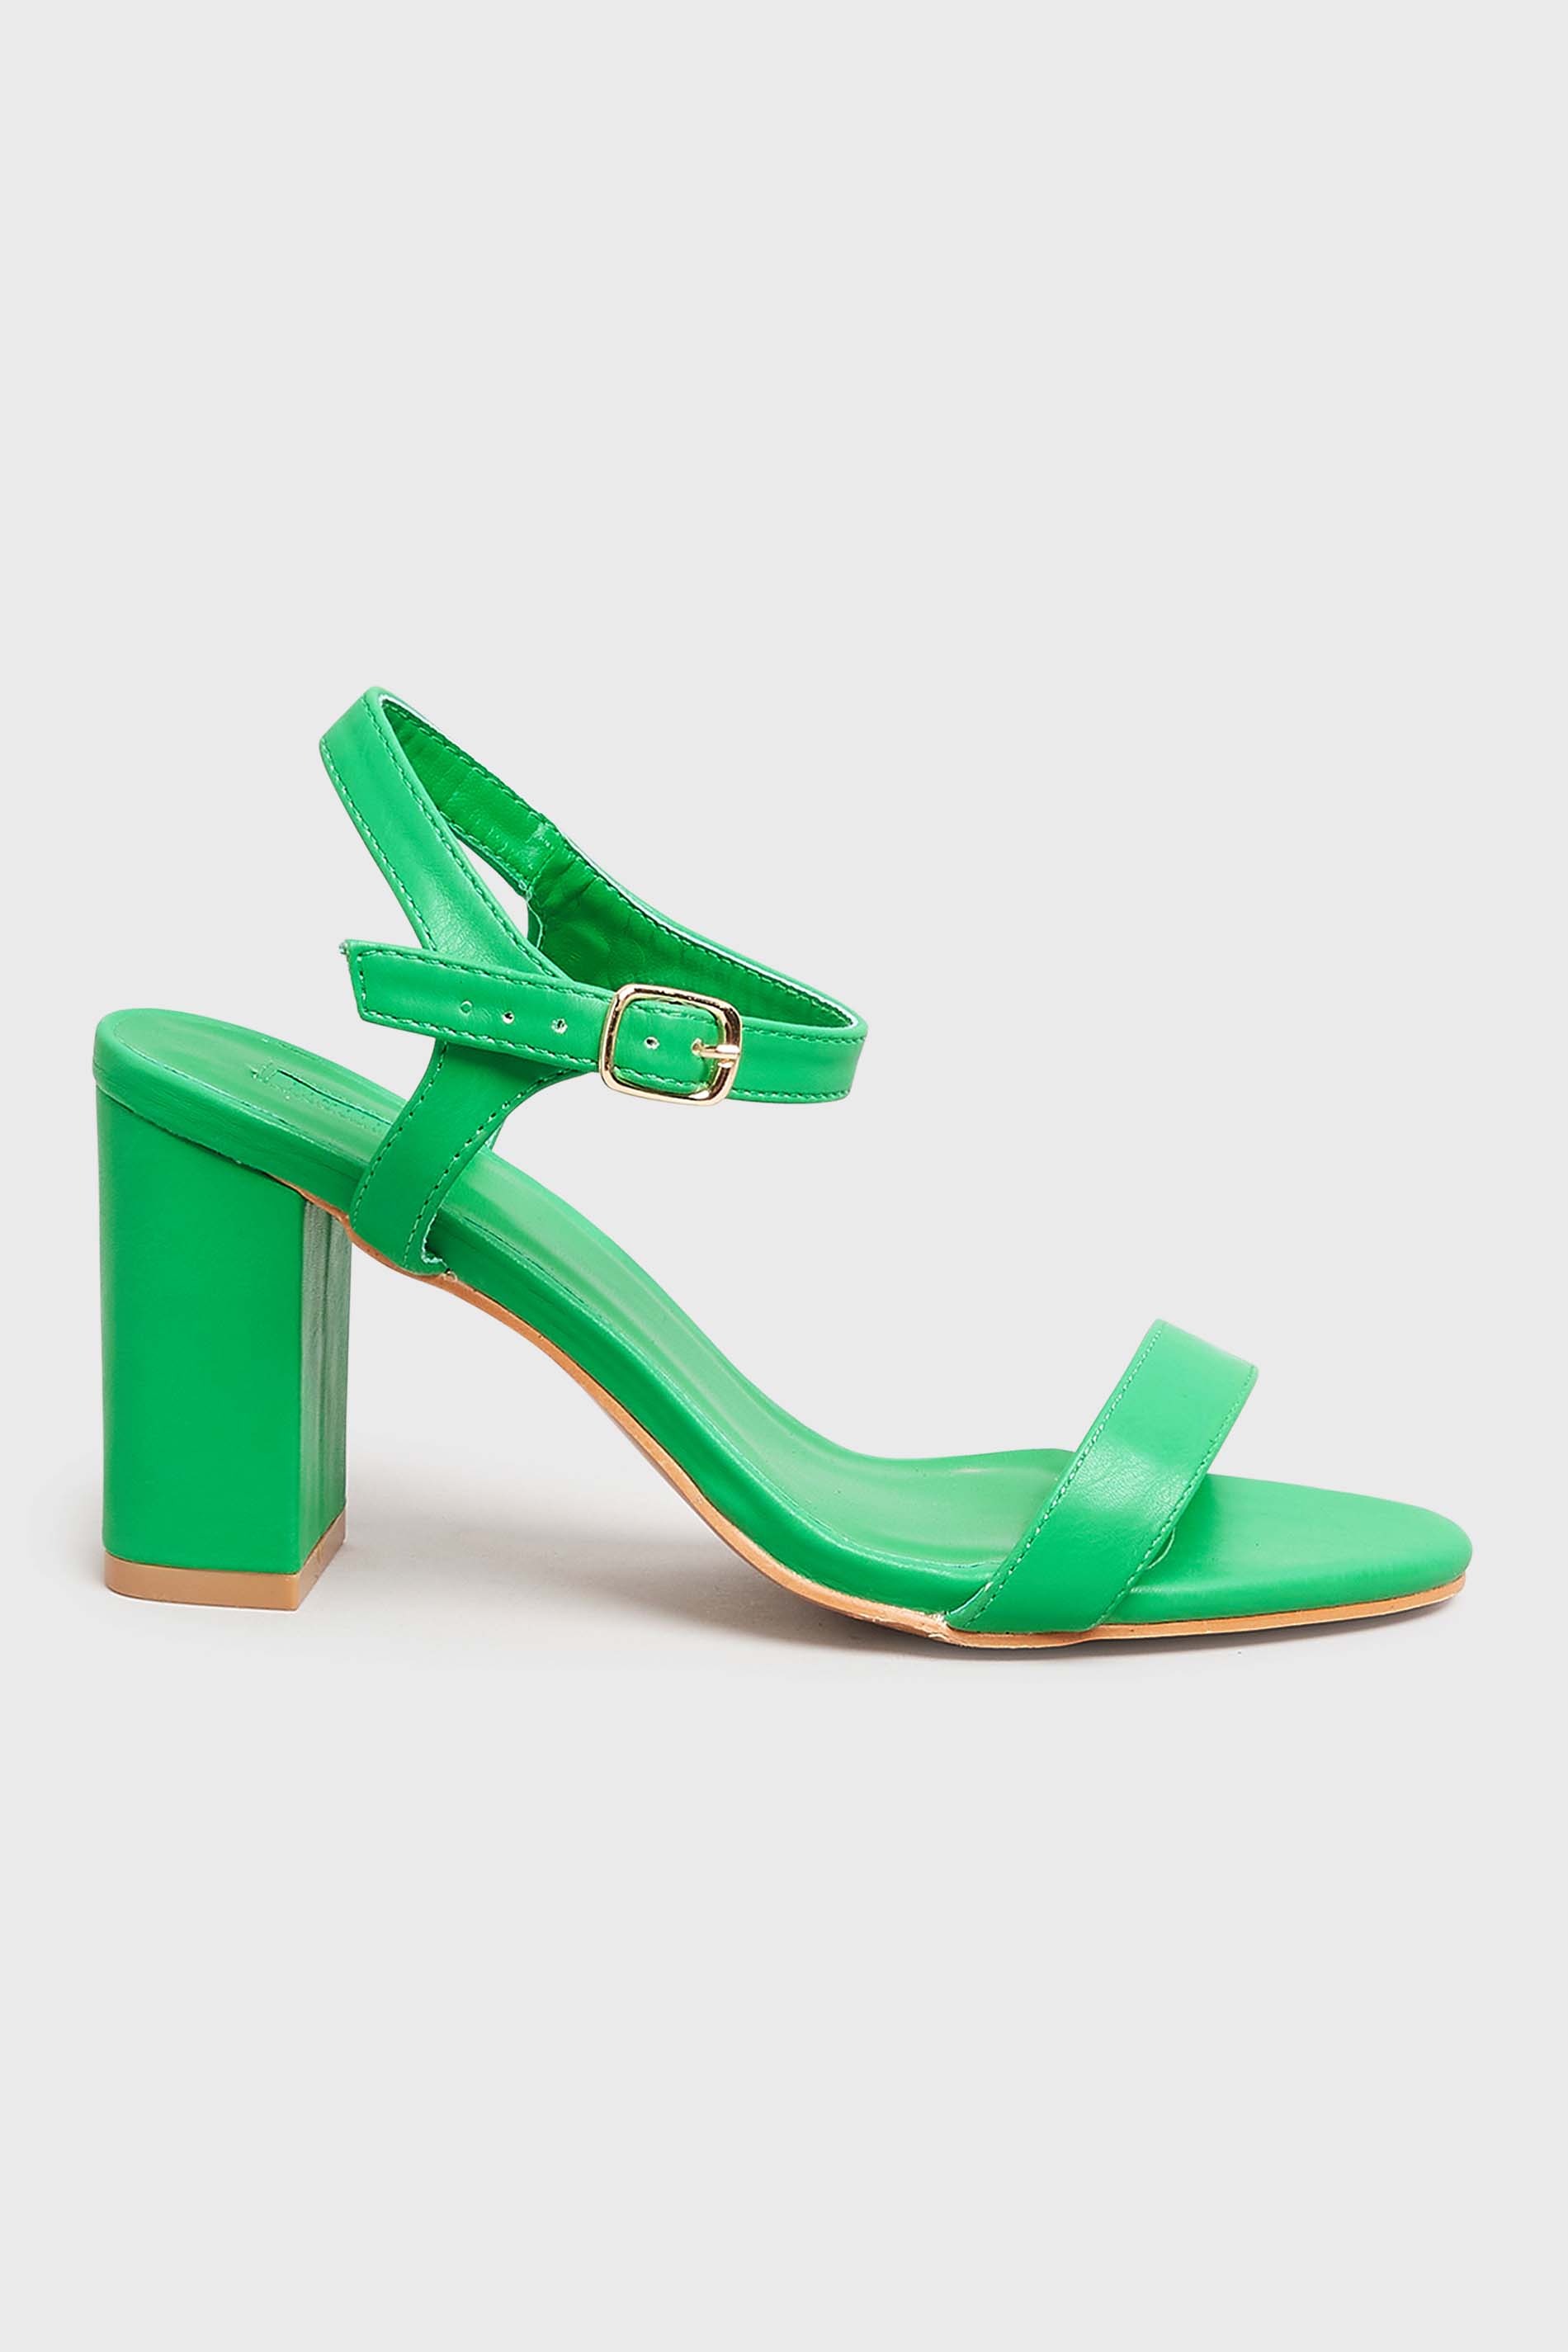 LIMITED COLLECTION Green Block Heel Sandal In Extra Wide EEE Fit | Long ...